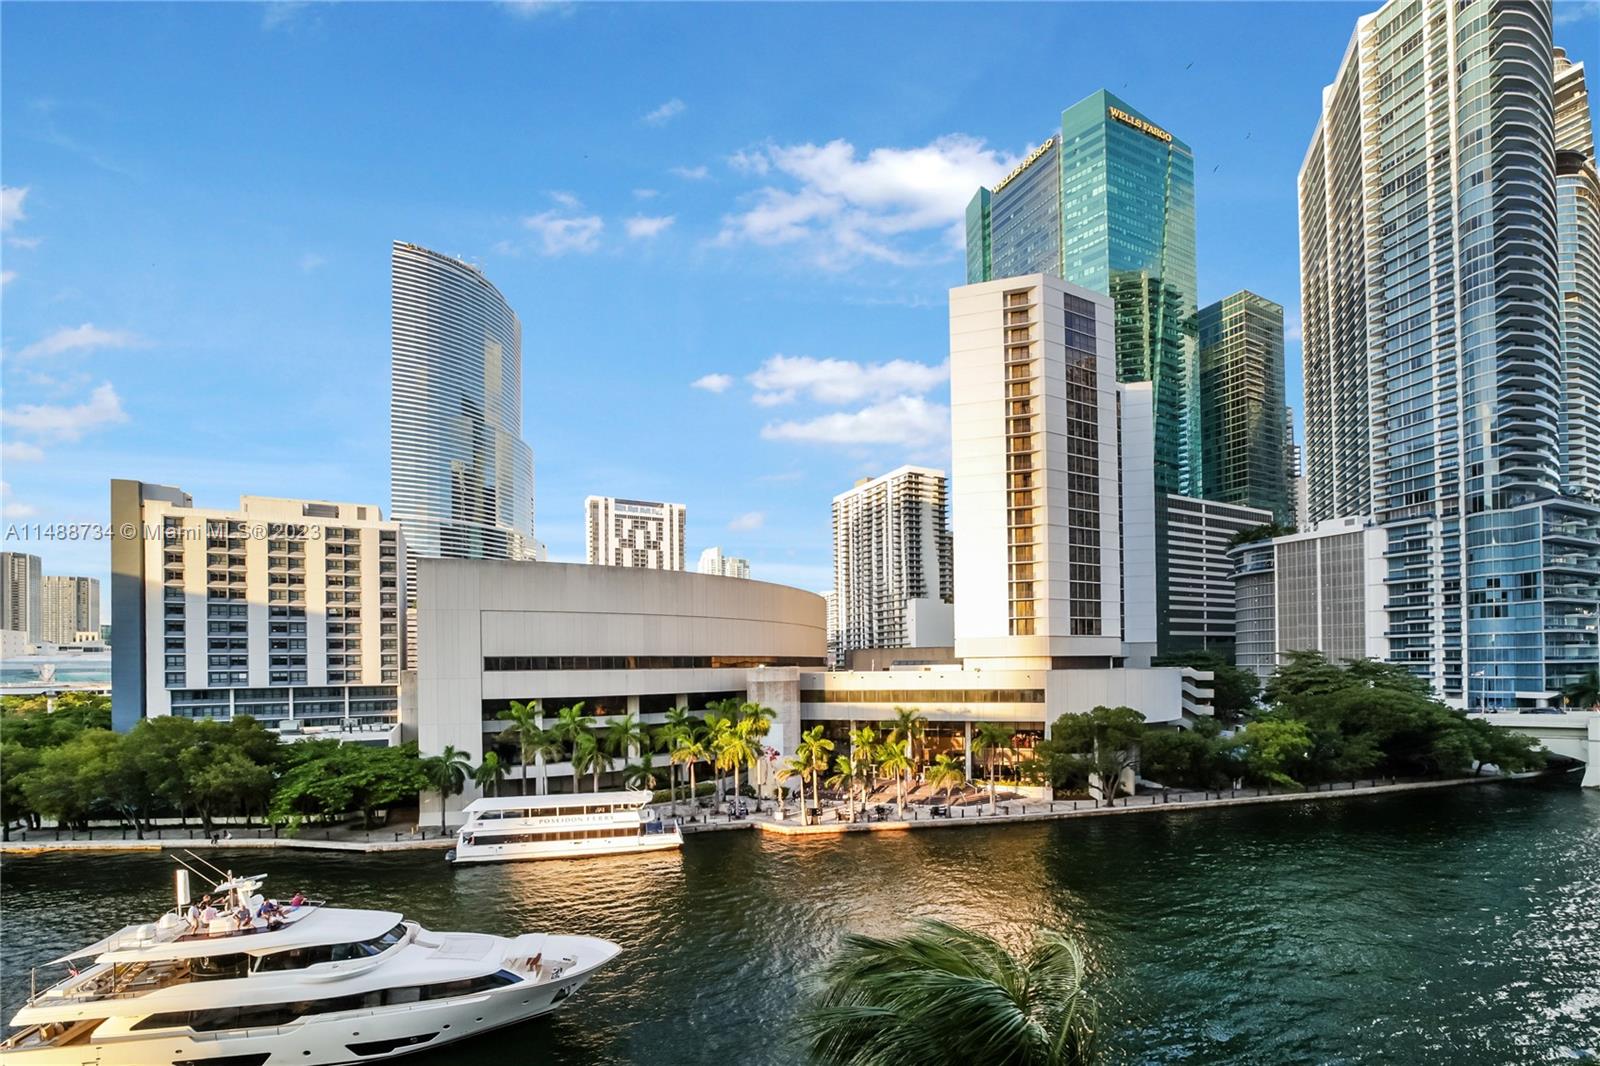 Brickell on the River South image #53